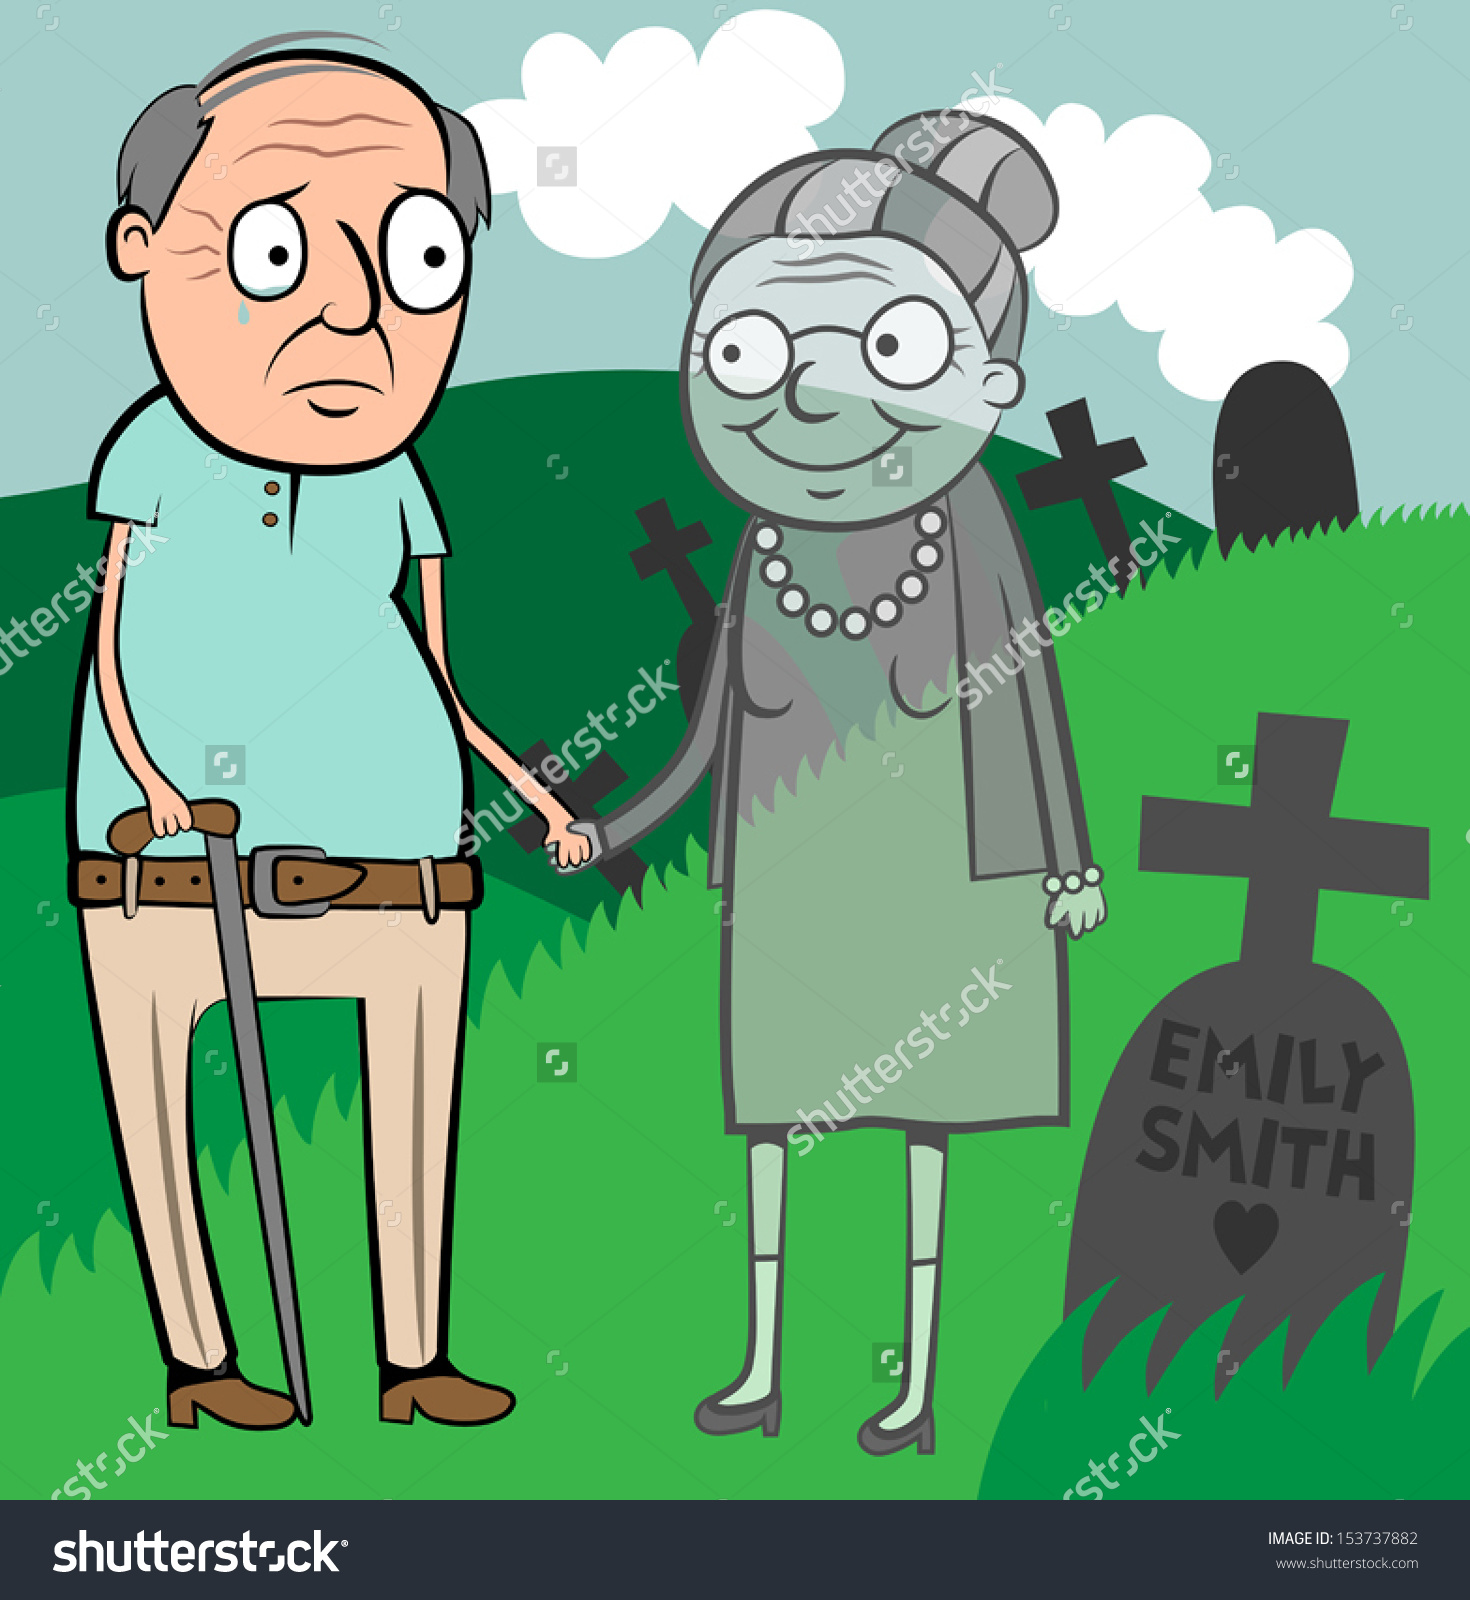 stock-vector-cartoon-vector-illustration-of-sad-old-man-crying-because-his-wife-died-grieving-widower-153737882.jpg